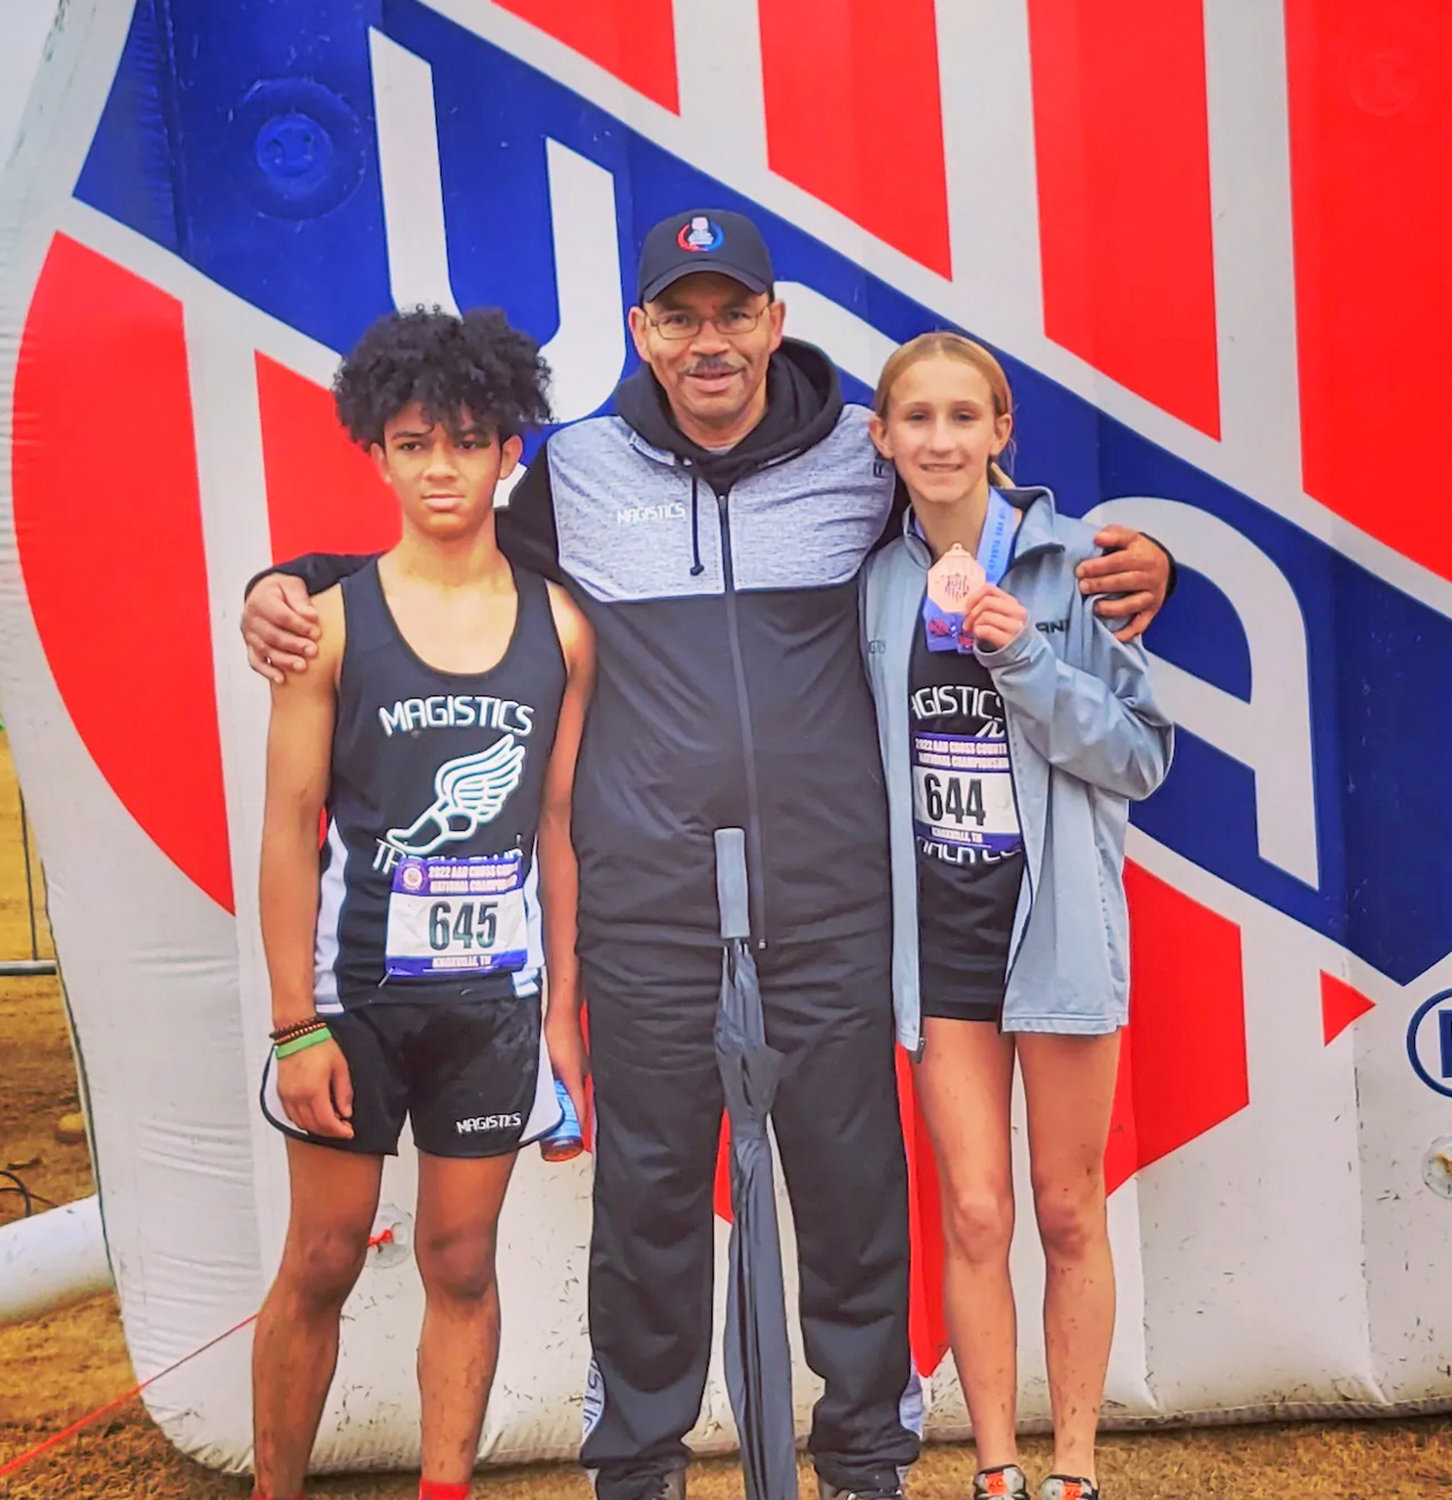 Two local runners competed in the AAU National Cross Country Championships Saturday in Knoxville, Tennessee. Eighth graders Emma Szarek, right, and Willie Bellamy, left, members of the Magistics Track Club, both competed in 4,000-meter races in the 13-14 age group. With them is coach Jim Peterson.